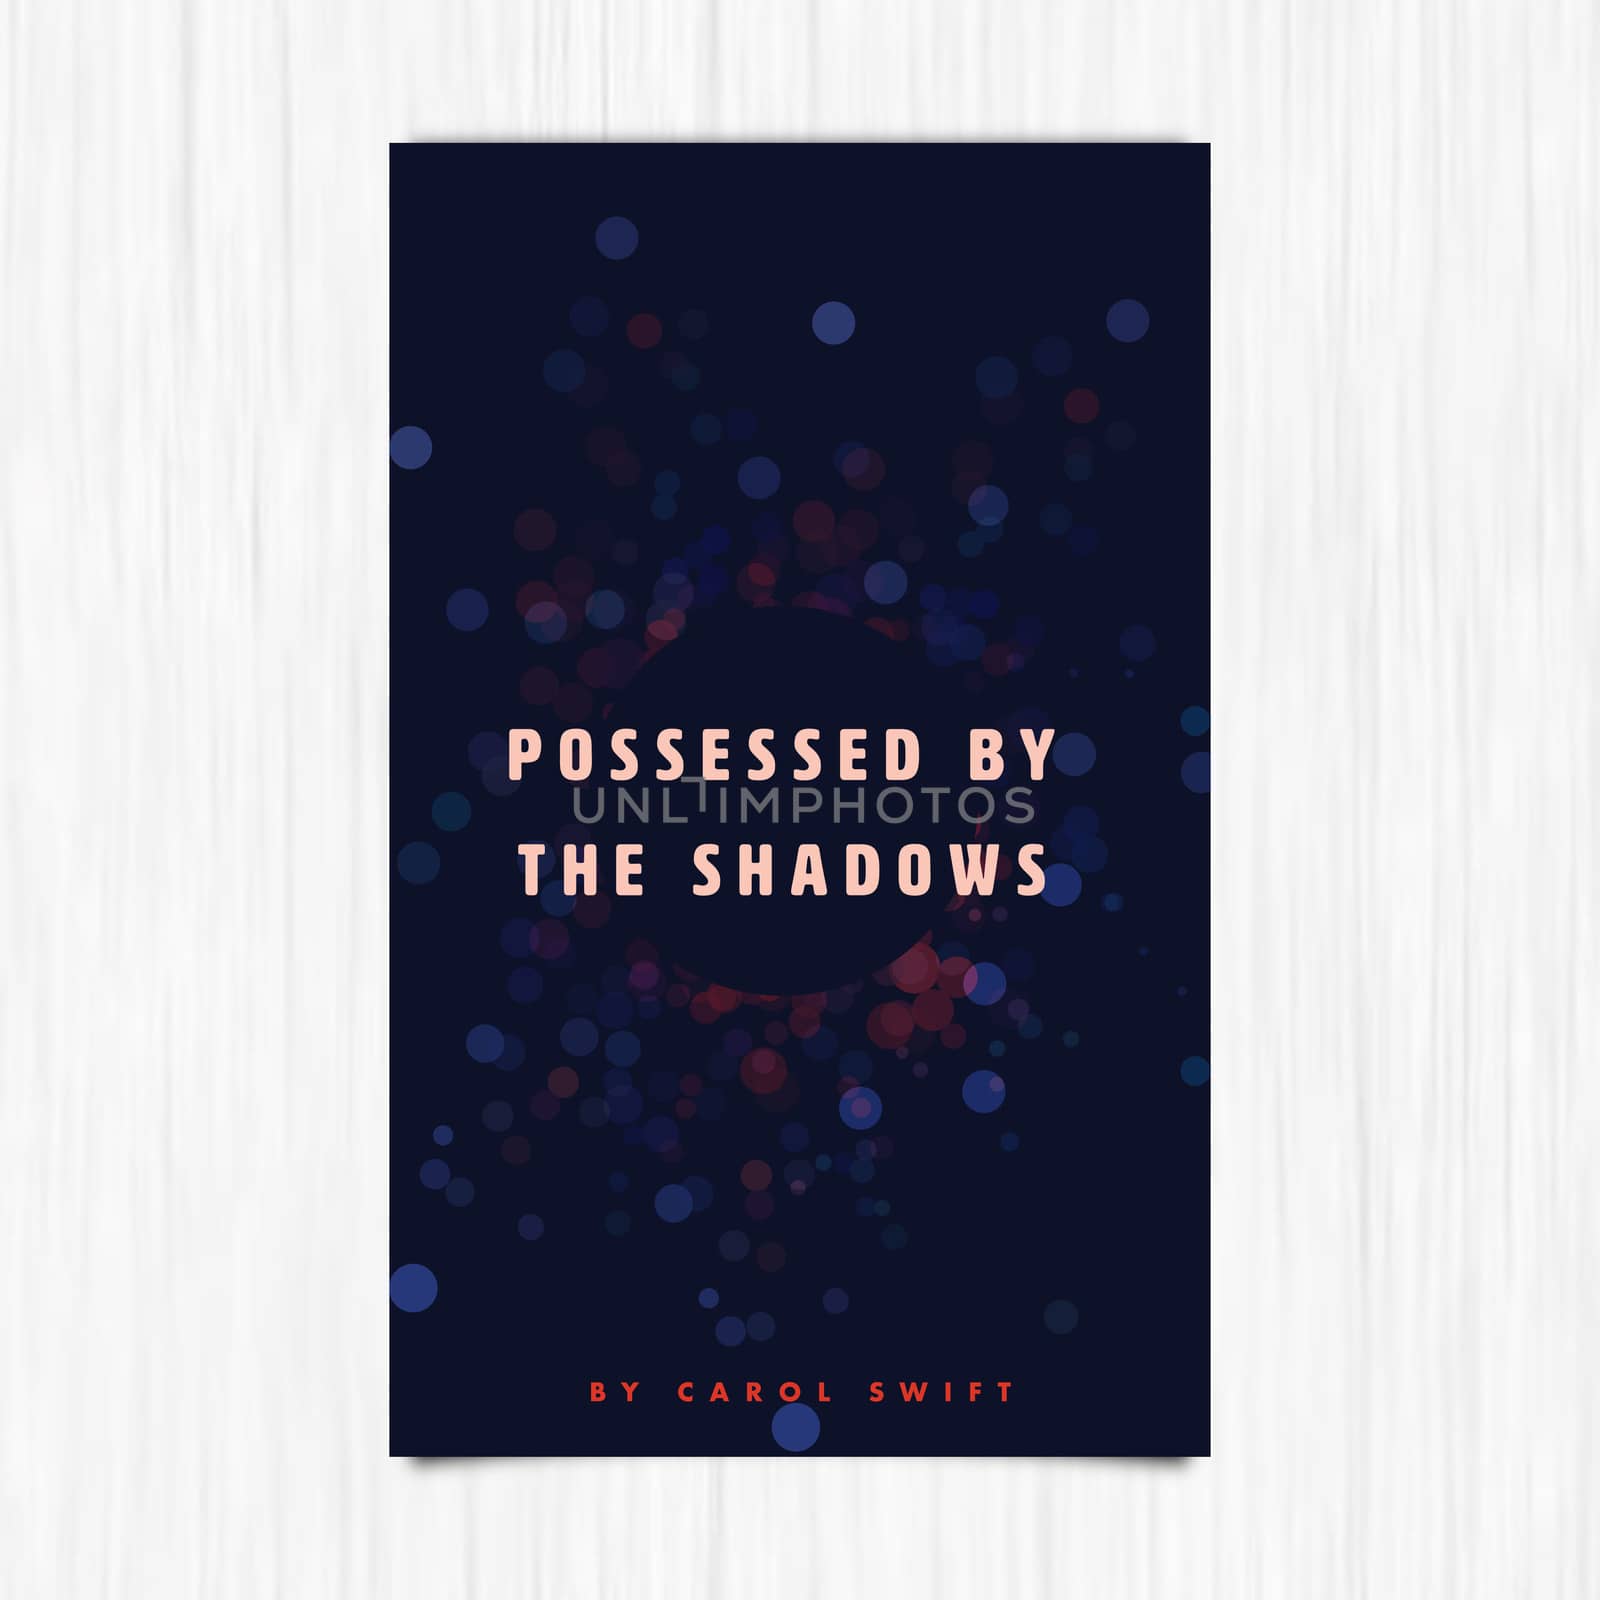 Vector of novel cover with possessed by the shadows text against white background